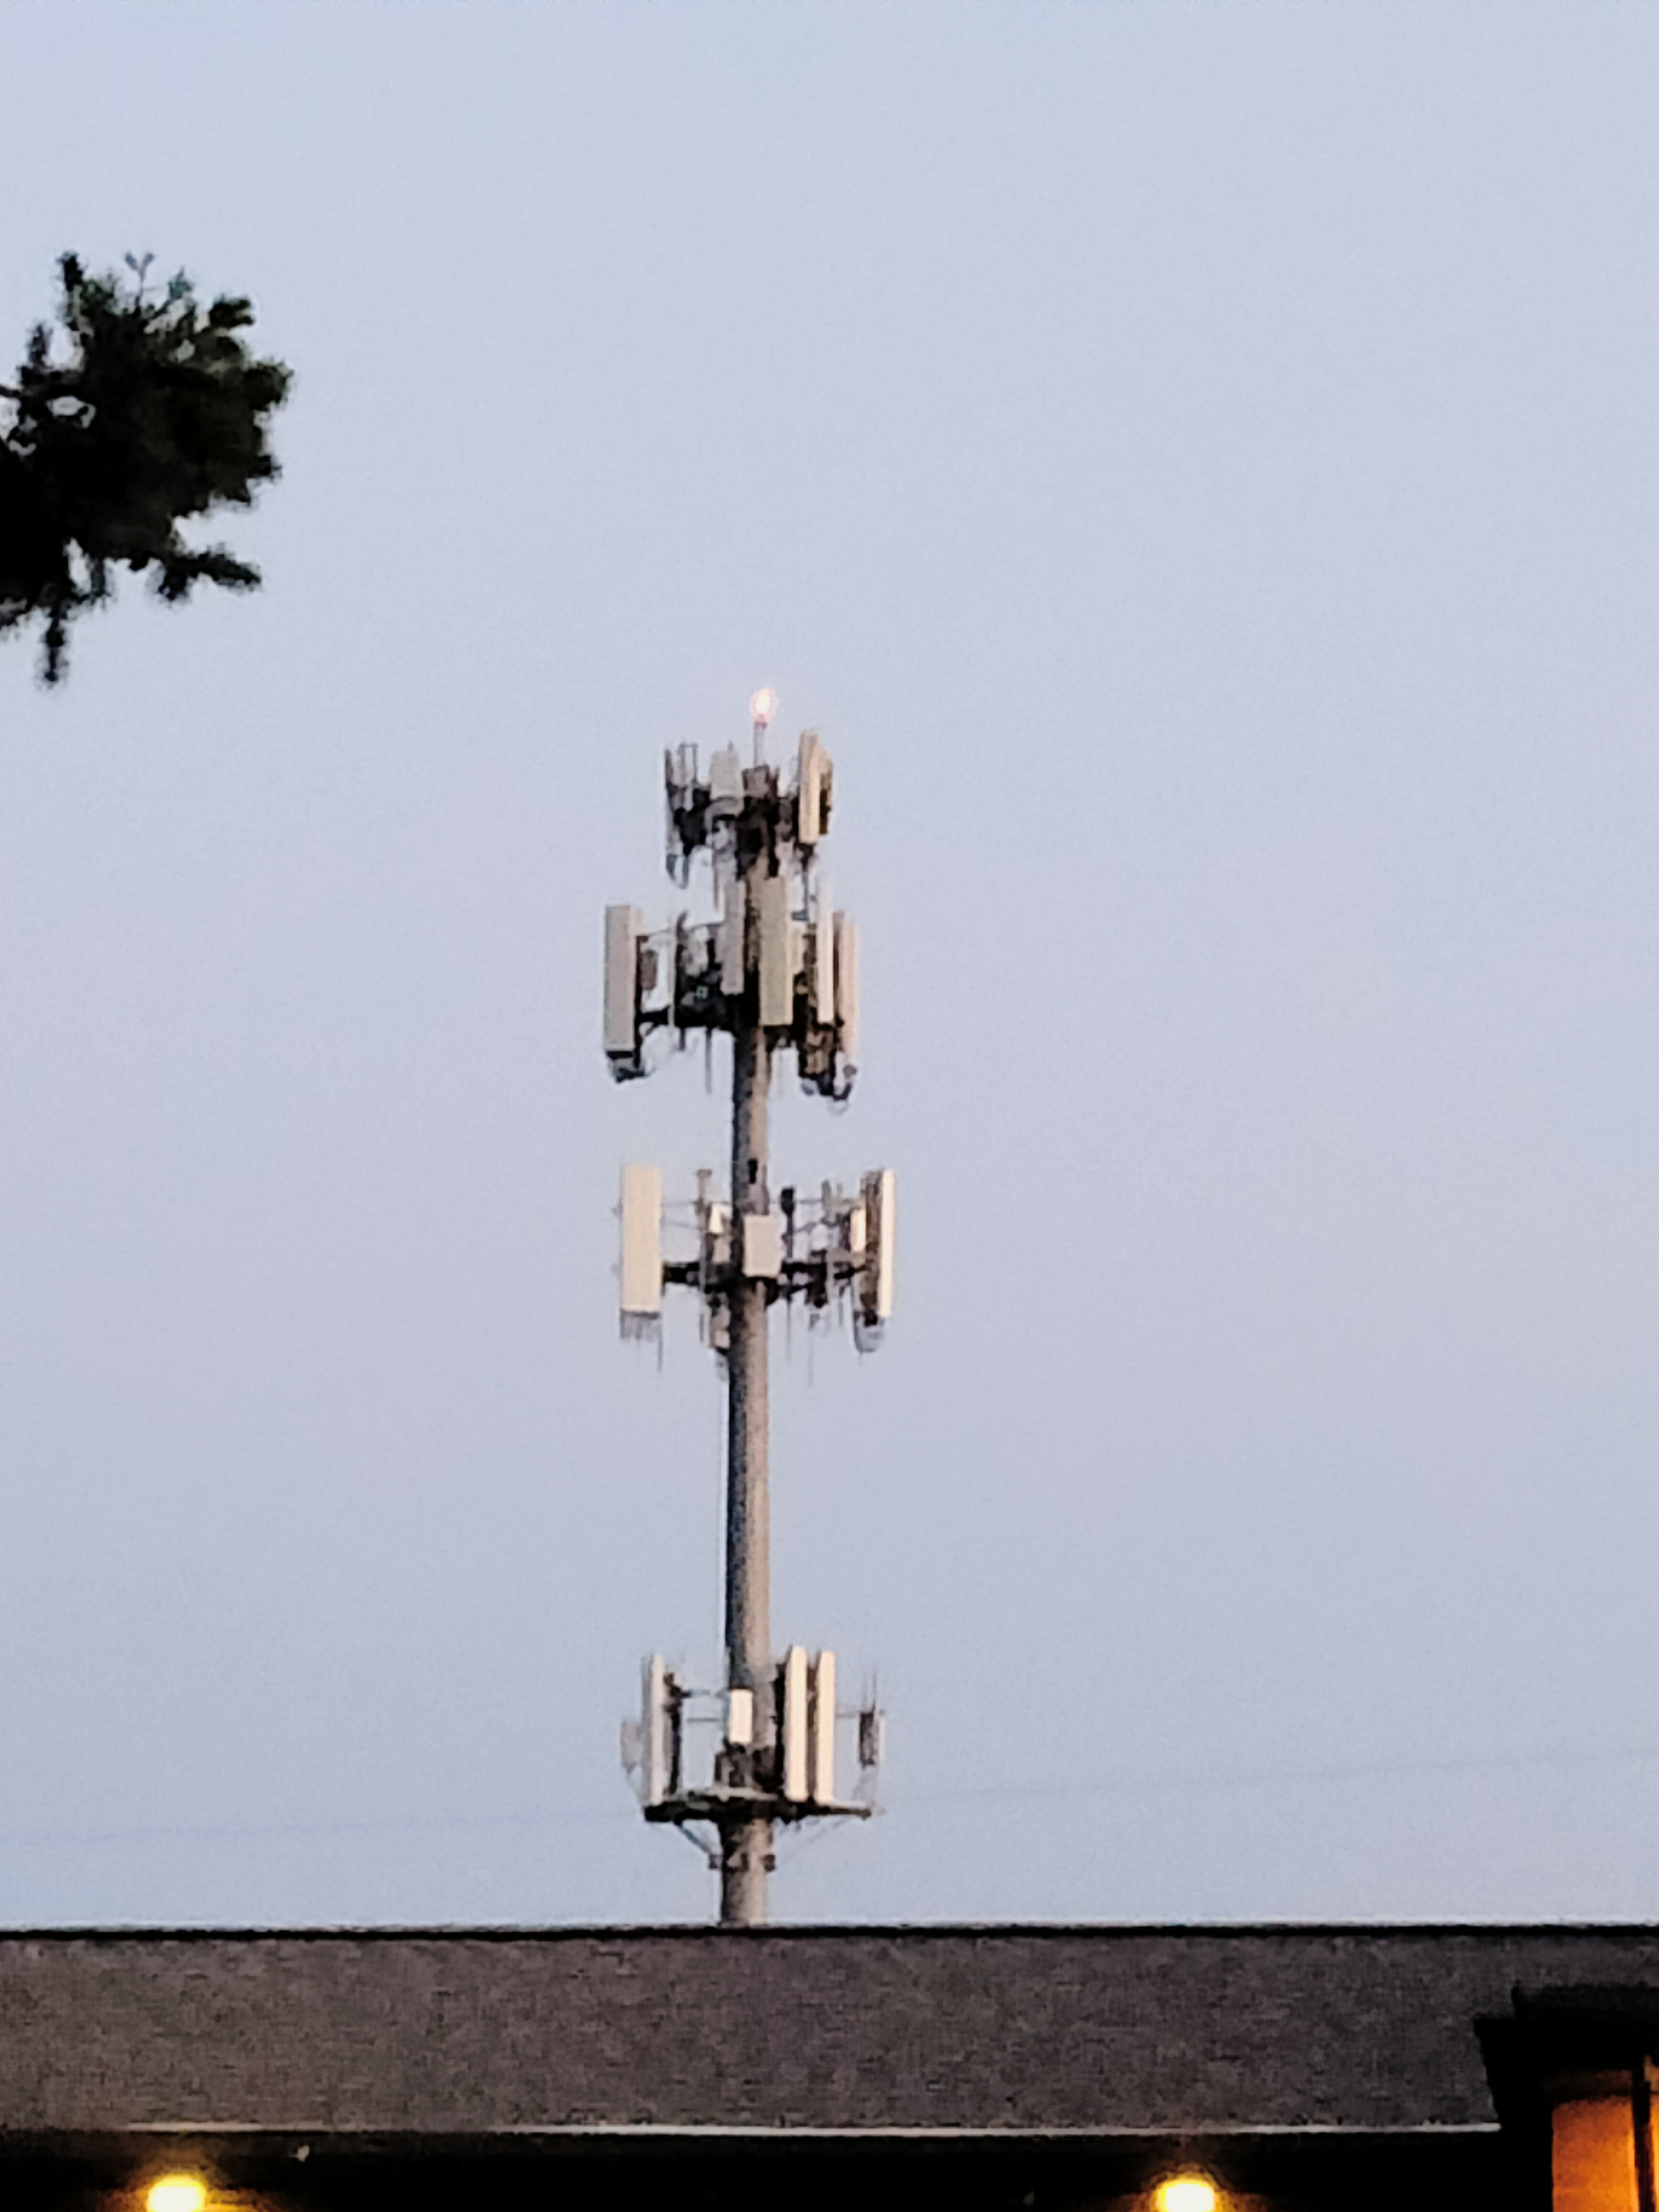 A cell tower only supports 4 carriers in most cases